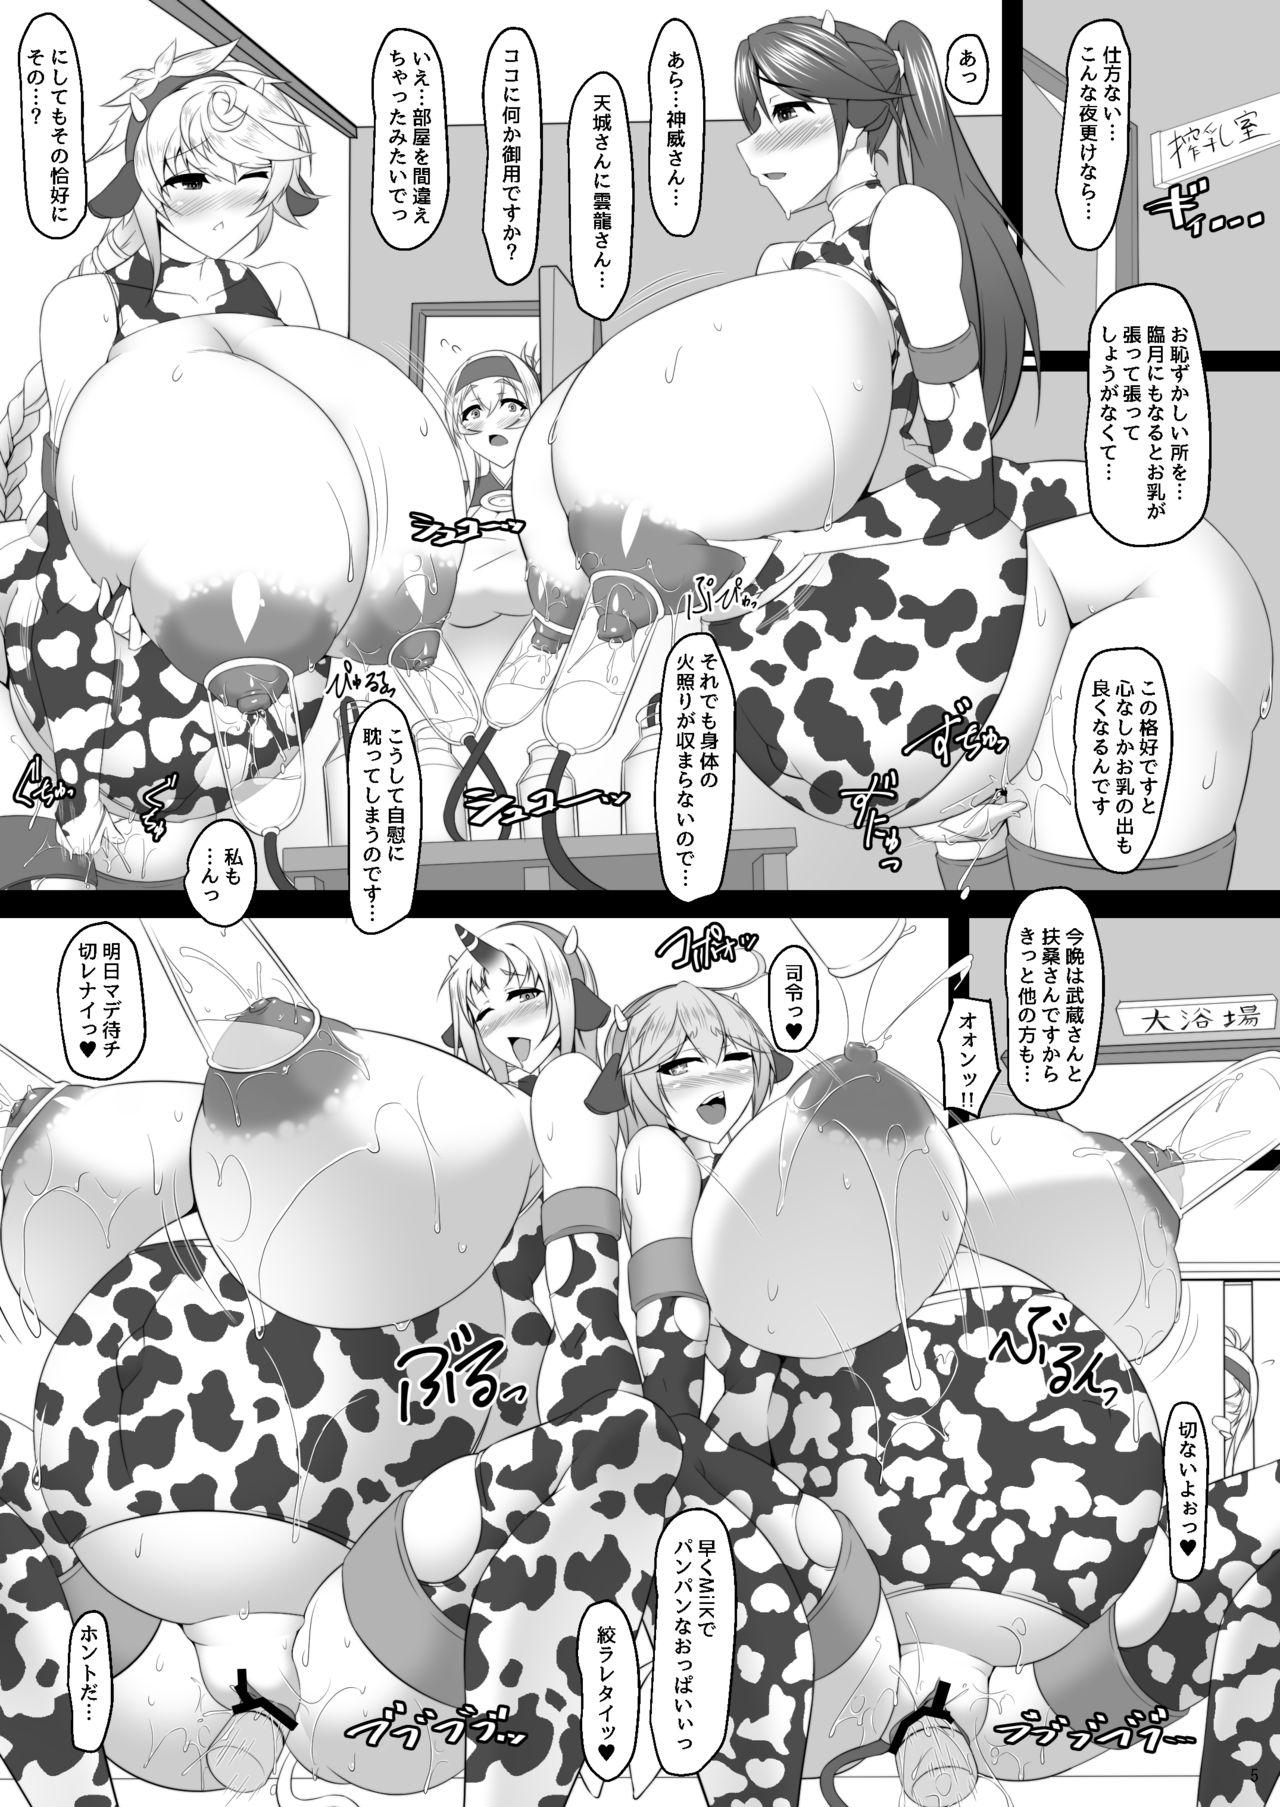 Verification Bote Colle 6 - Kantai collection Wrestling - Page 5